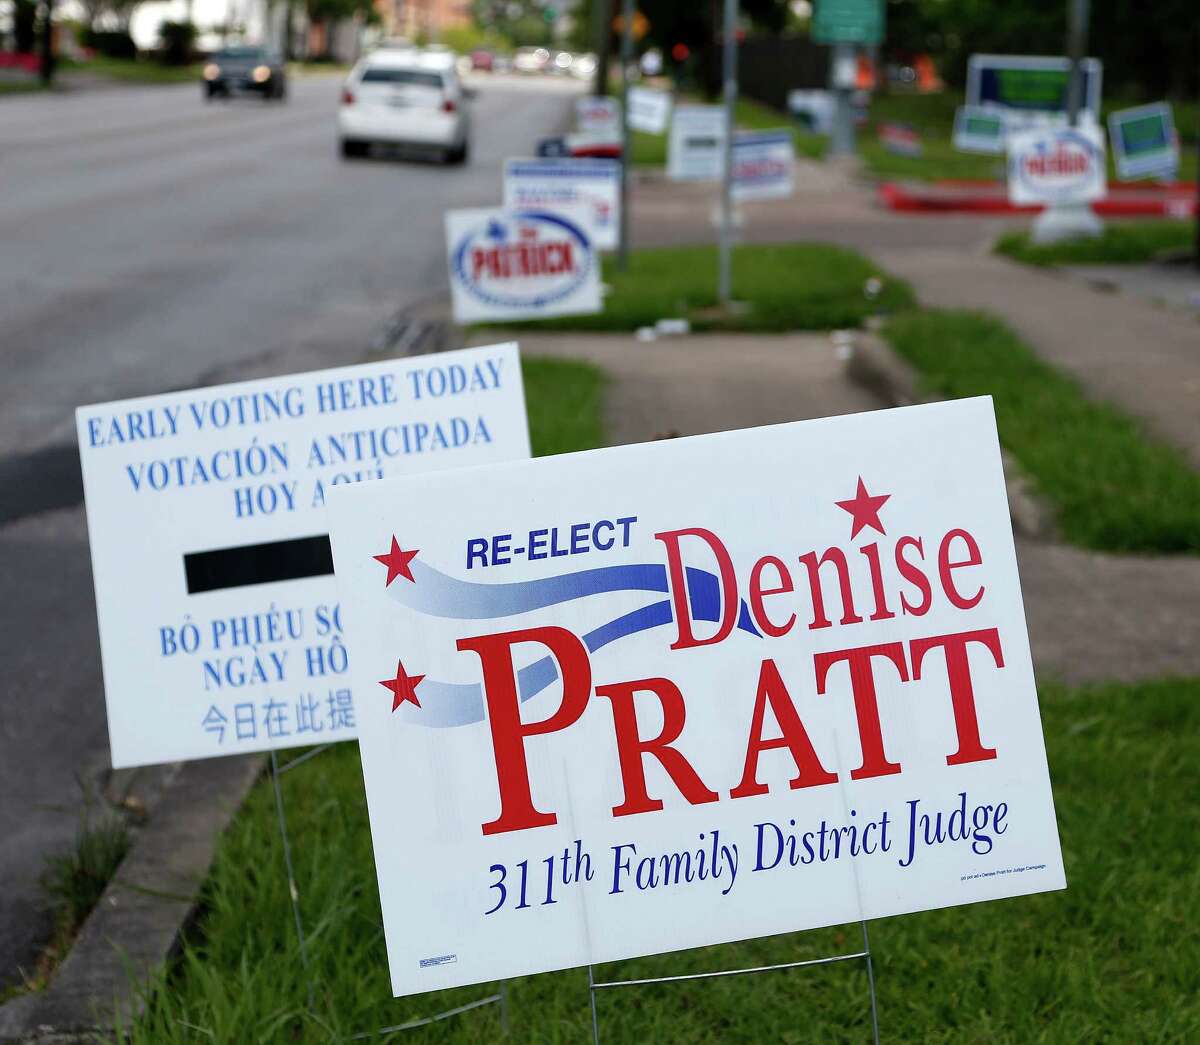 Ex-Judge Denise Pratt's campaign signs up at the Metropolitan Multi-Services Center, 1475 W Gray early voting location, Thursday, May 22, 2014, in Houston.